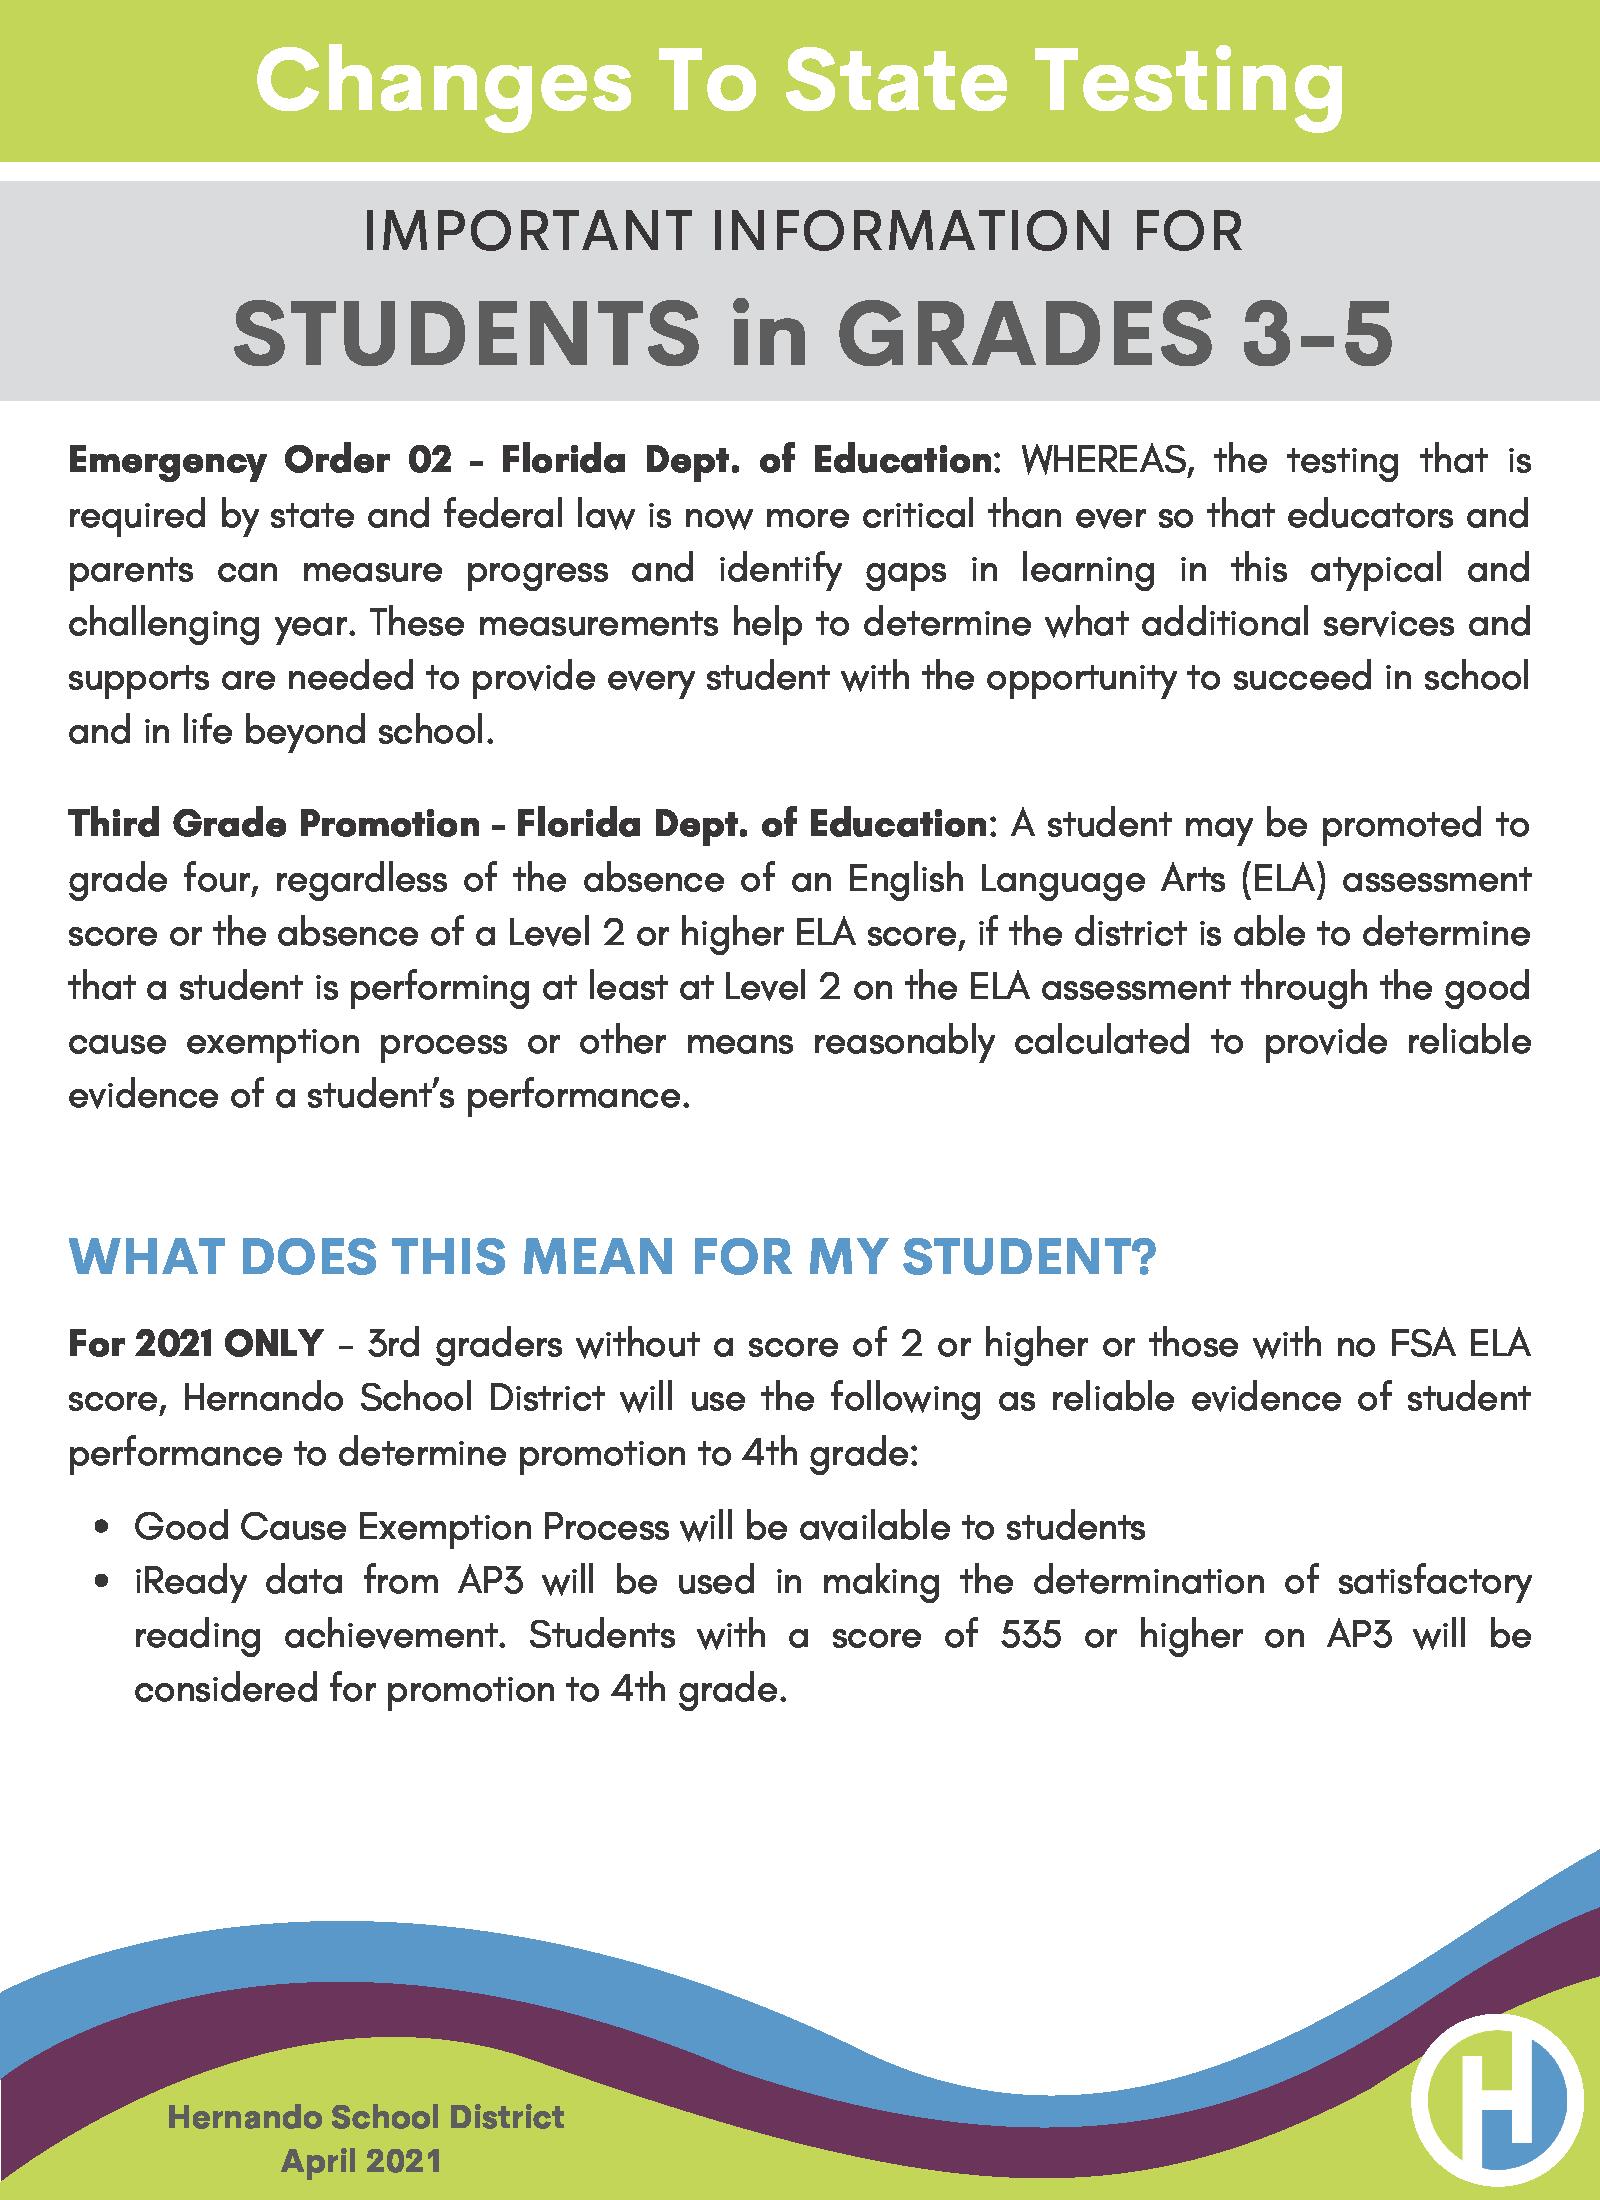 Guide to Understanding Changes in State Testing for Grades 3-5